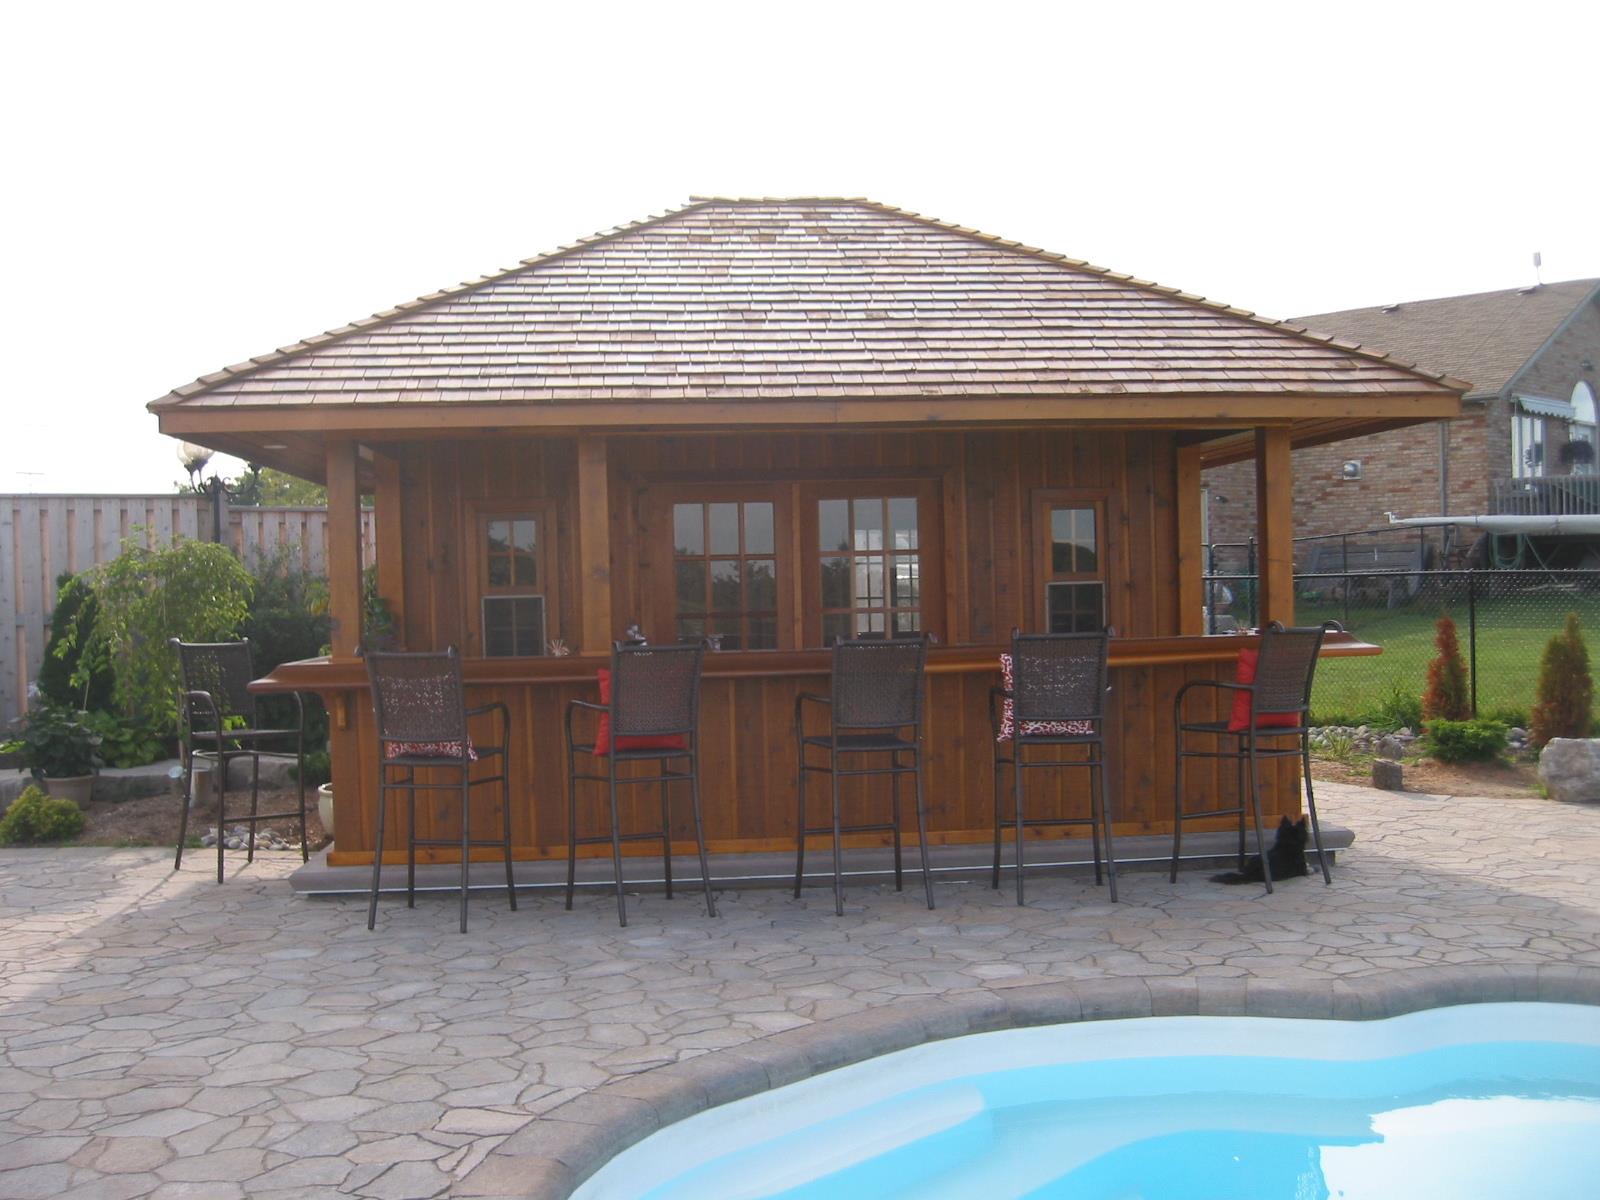 Cedar barside pool cabana 13x16 with double casement windows in Grimsby Ontario. ID number 100816-1.